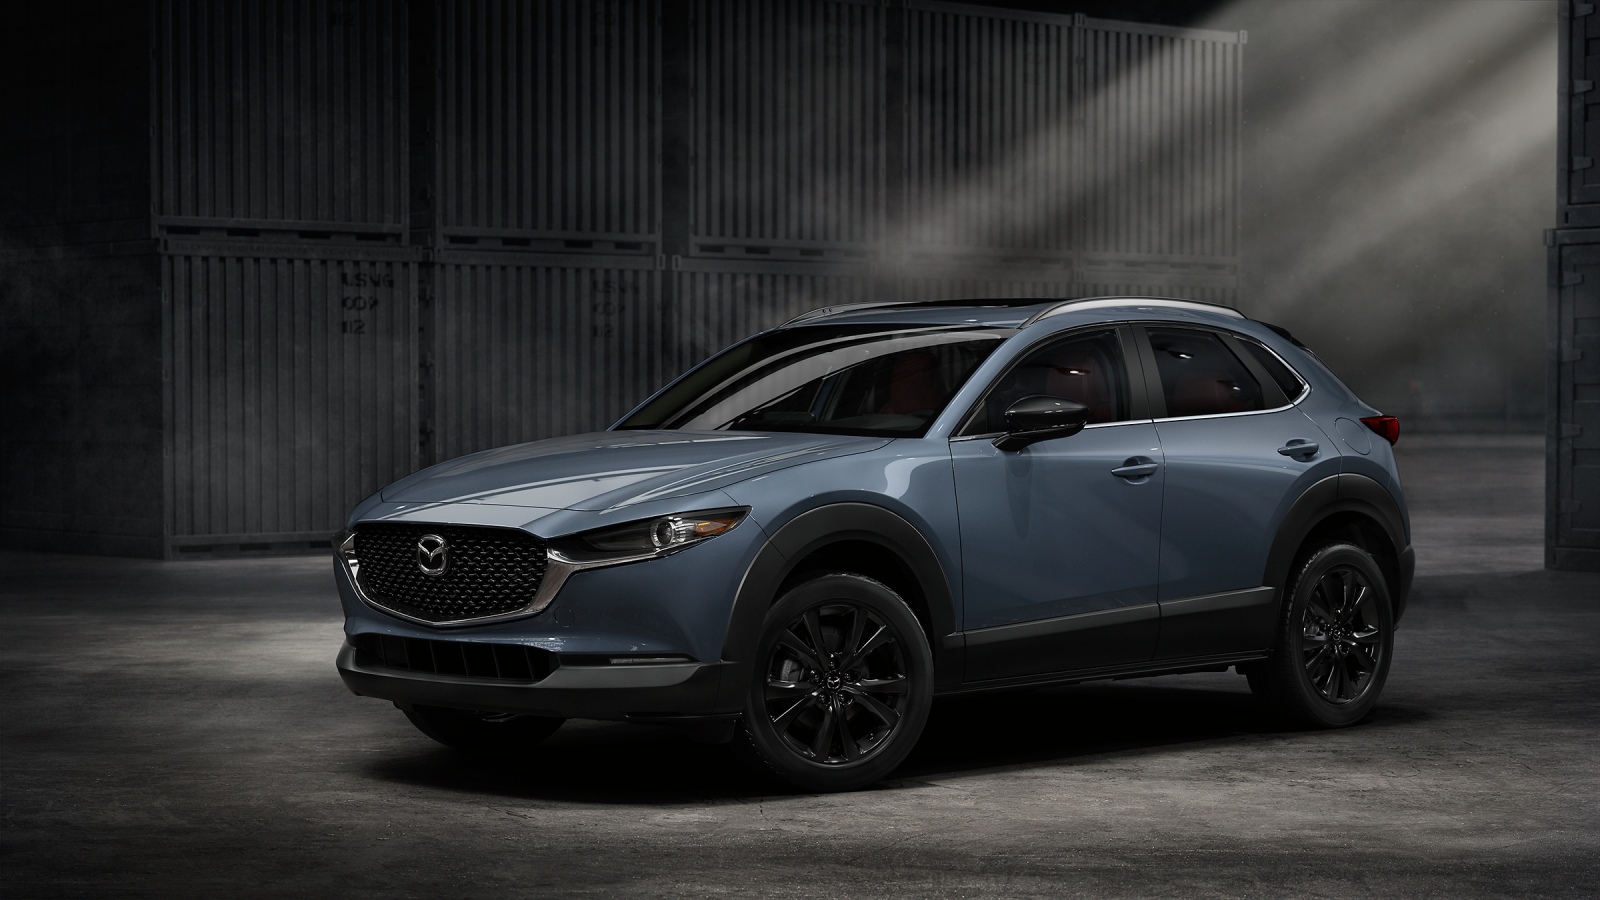 The most fuel-efficient SUVs under $50,000 include the Mazda CX-30